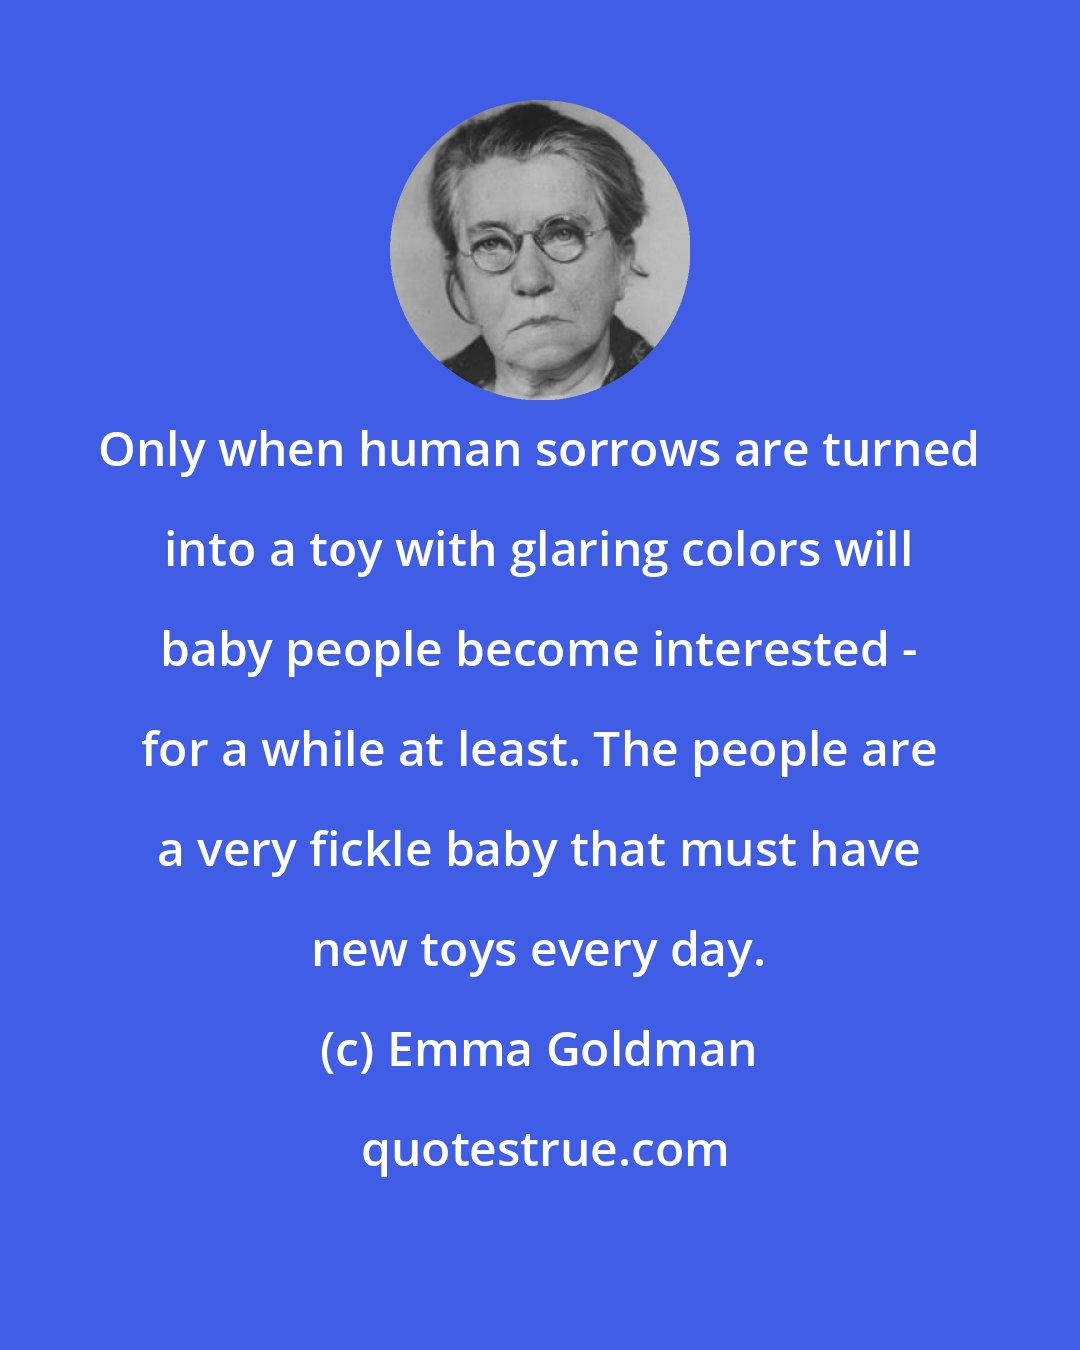 Emma Goldman: Only when human sorrows are turned into a toy with glaring colors will baby people become interested - for a while at least. The people are a very fickle baby that must have new toys every day.